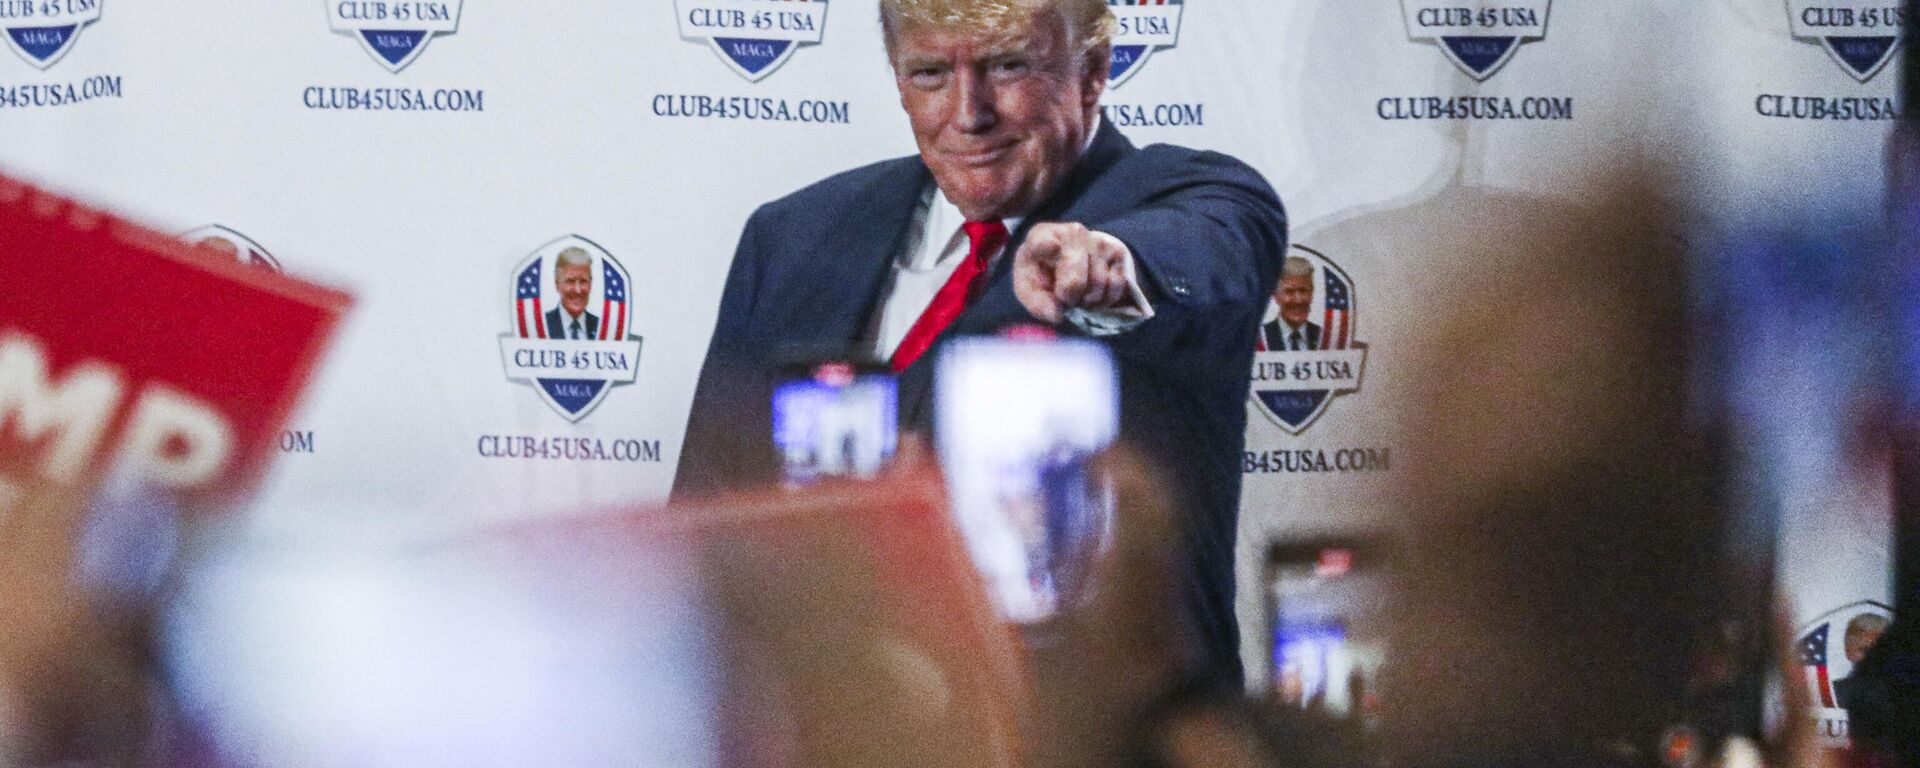 Former US President Donald Trump gestures to supporters during Trump's President Day event at the Hilton Palm Beach Airport in West Palm Beach, Florida, on February 20, 2023 - Sputnik International, 1920, 27.02.2023